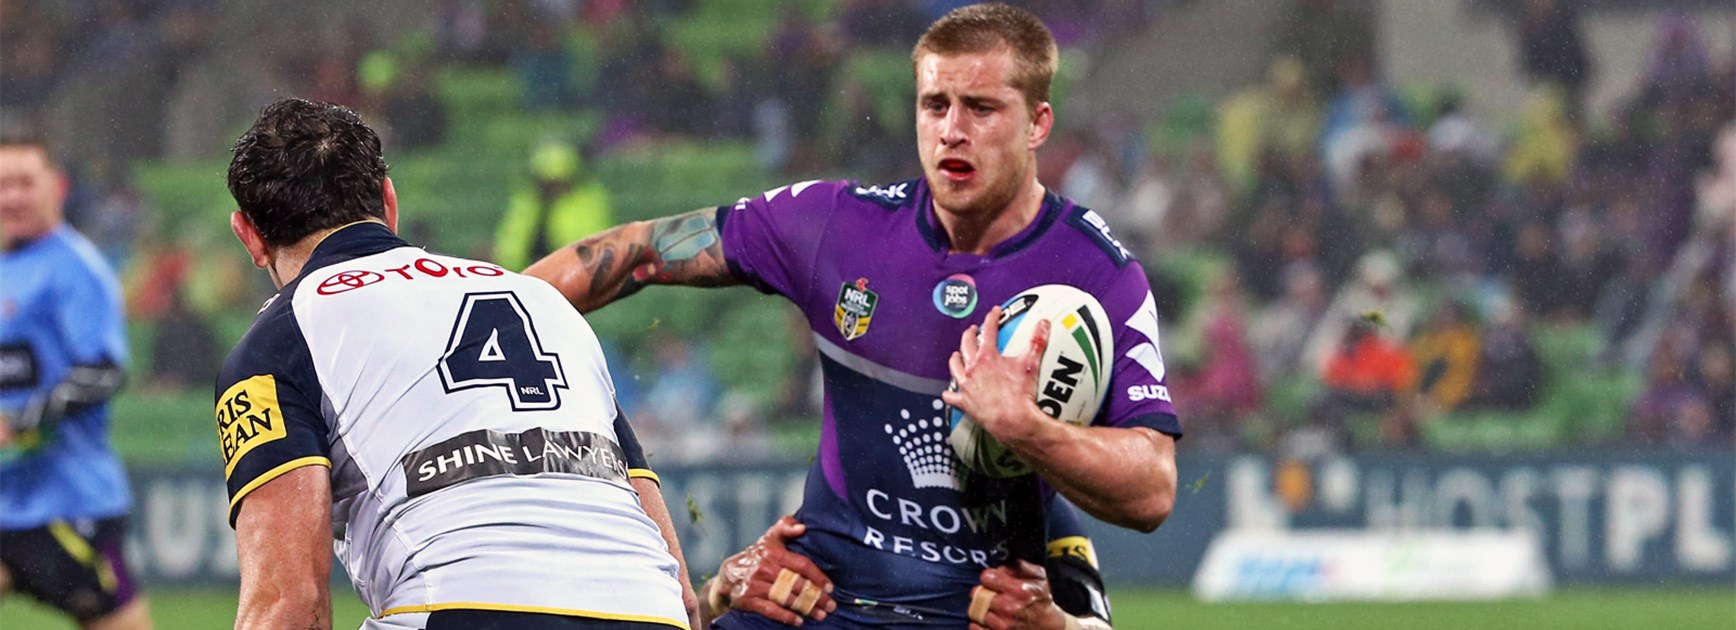 Stand-in Storm fullback Cameron Munster continues to perform well in the absence of first-choice No.1 Billy Slater.